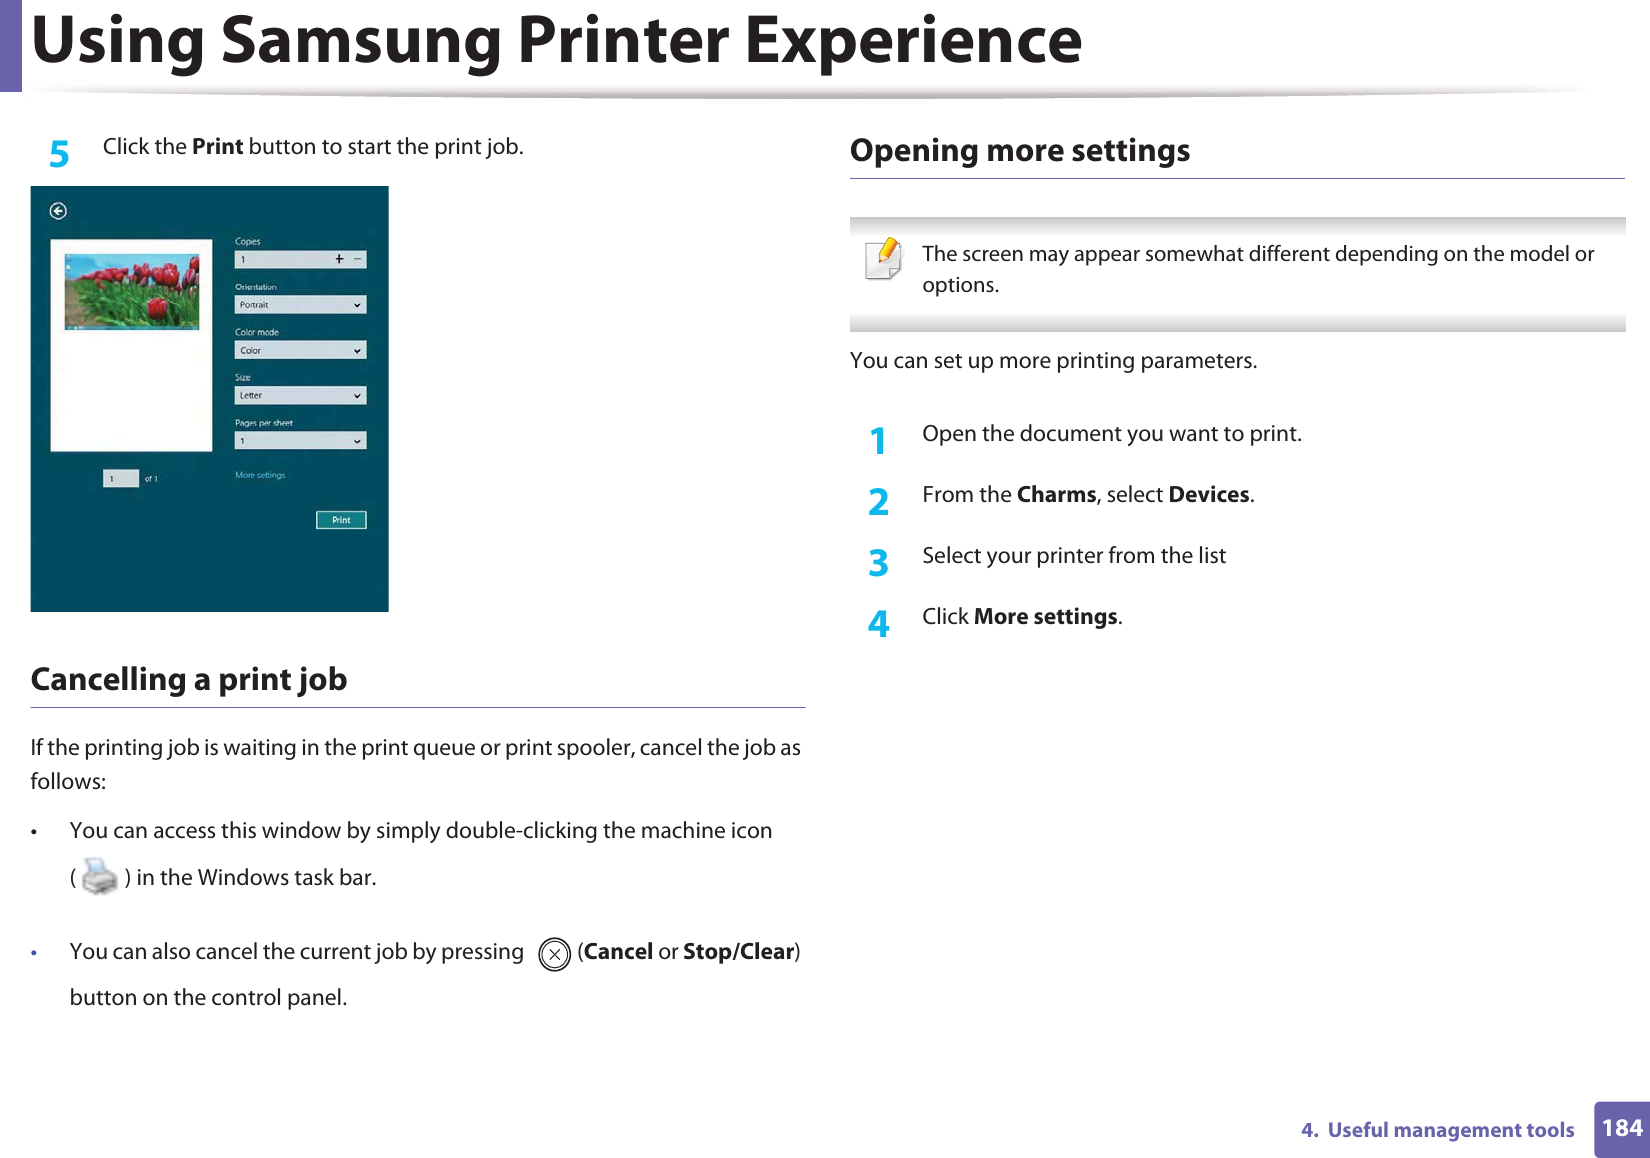 Using Samsung Printer Experience1844.  Useful management tools5  Click the Print button to start the print job.Cancelling a print jobIf the printing job is waiting in the print queue or print spooler, cancel the job as follows:• You can access this window by simply double-clicking the machine icon ( ) in the Windows task bar. •You can also cancel the current job by pressing  (Cancel or Stop/Clear) button on the control panel.Opening more settings The screen may appear somewhat different depending on the model or options. You can set up more printing parameters.1Open the document you want to print.2  From the Charms, select Devices.3  Select your printer from the list4  Click More settings.